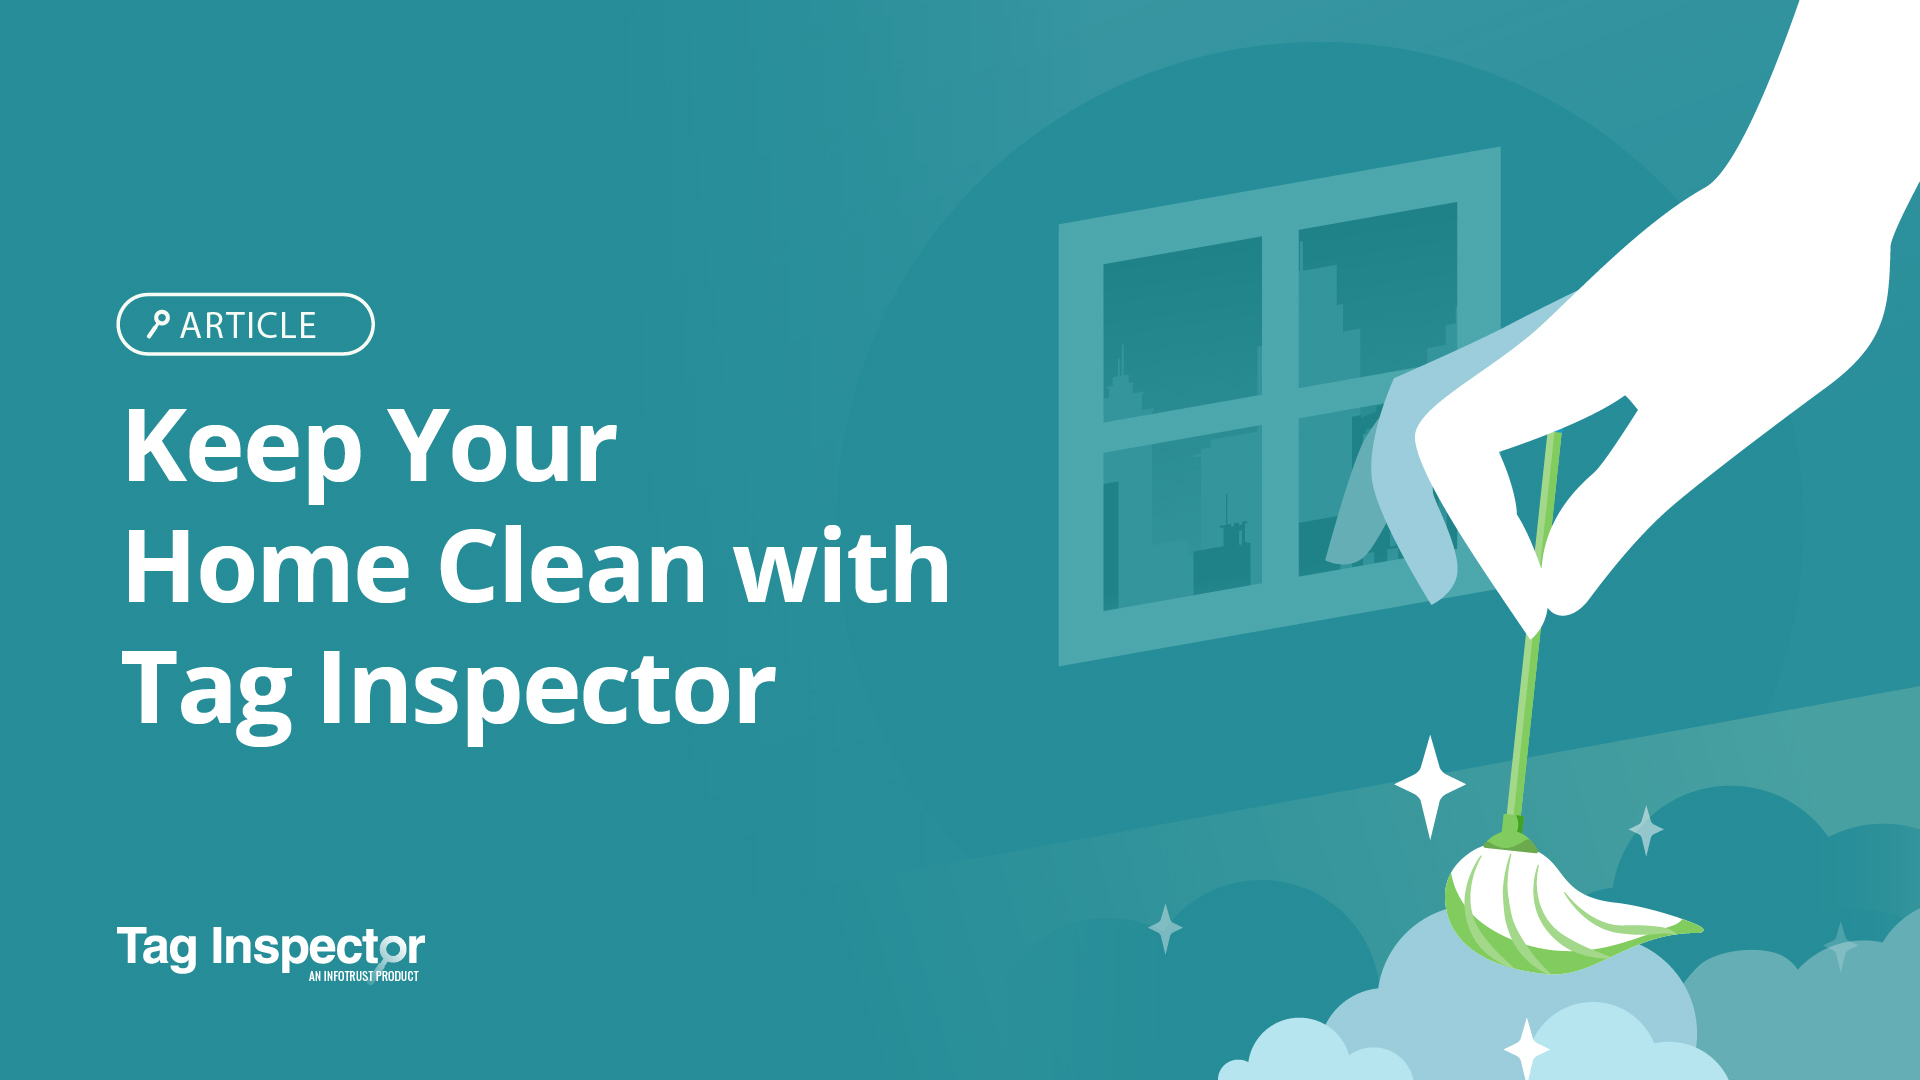 Keep Your Home Clean with Tag Inspector